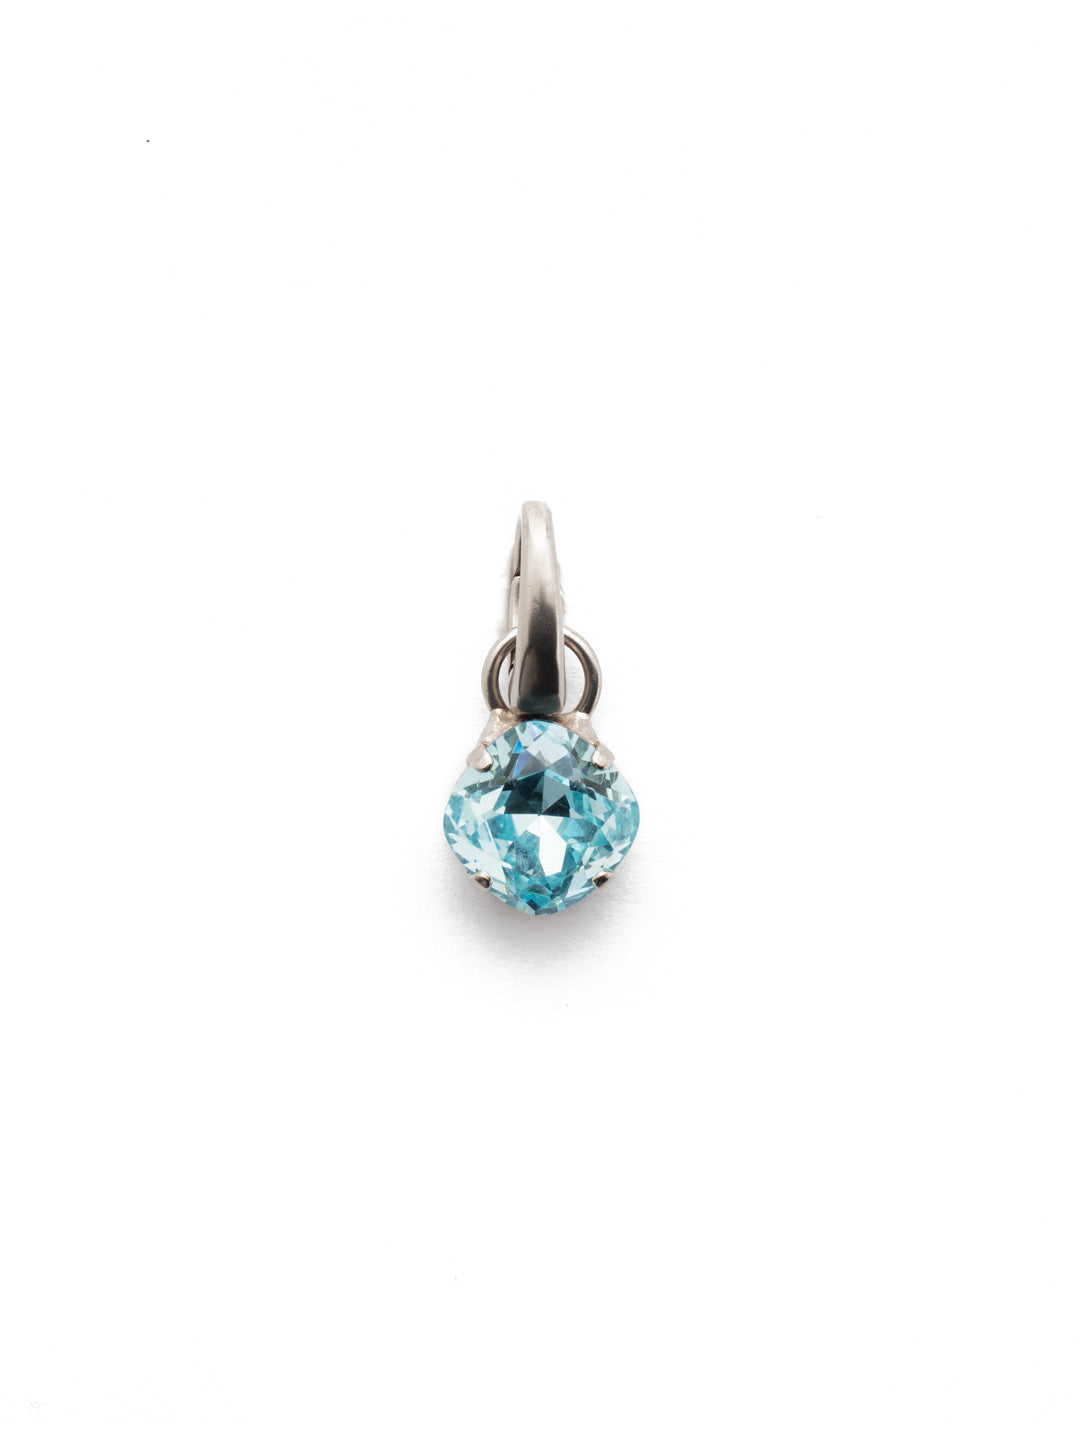 December Birthstone Aqua Charm - CEU1ASAQU - <p>A cushion-cut crystal designed in your beautiful birthstone. Simply attach it to our favorite chain for an everyday look. From Sorrelli's Aquamarine collection in our Antique Silver-tone finish.</p>